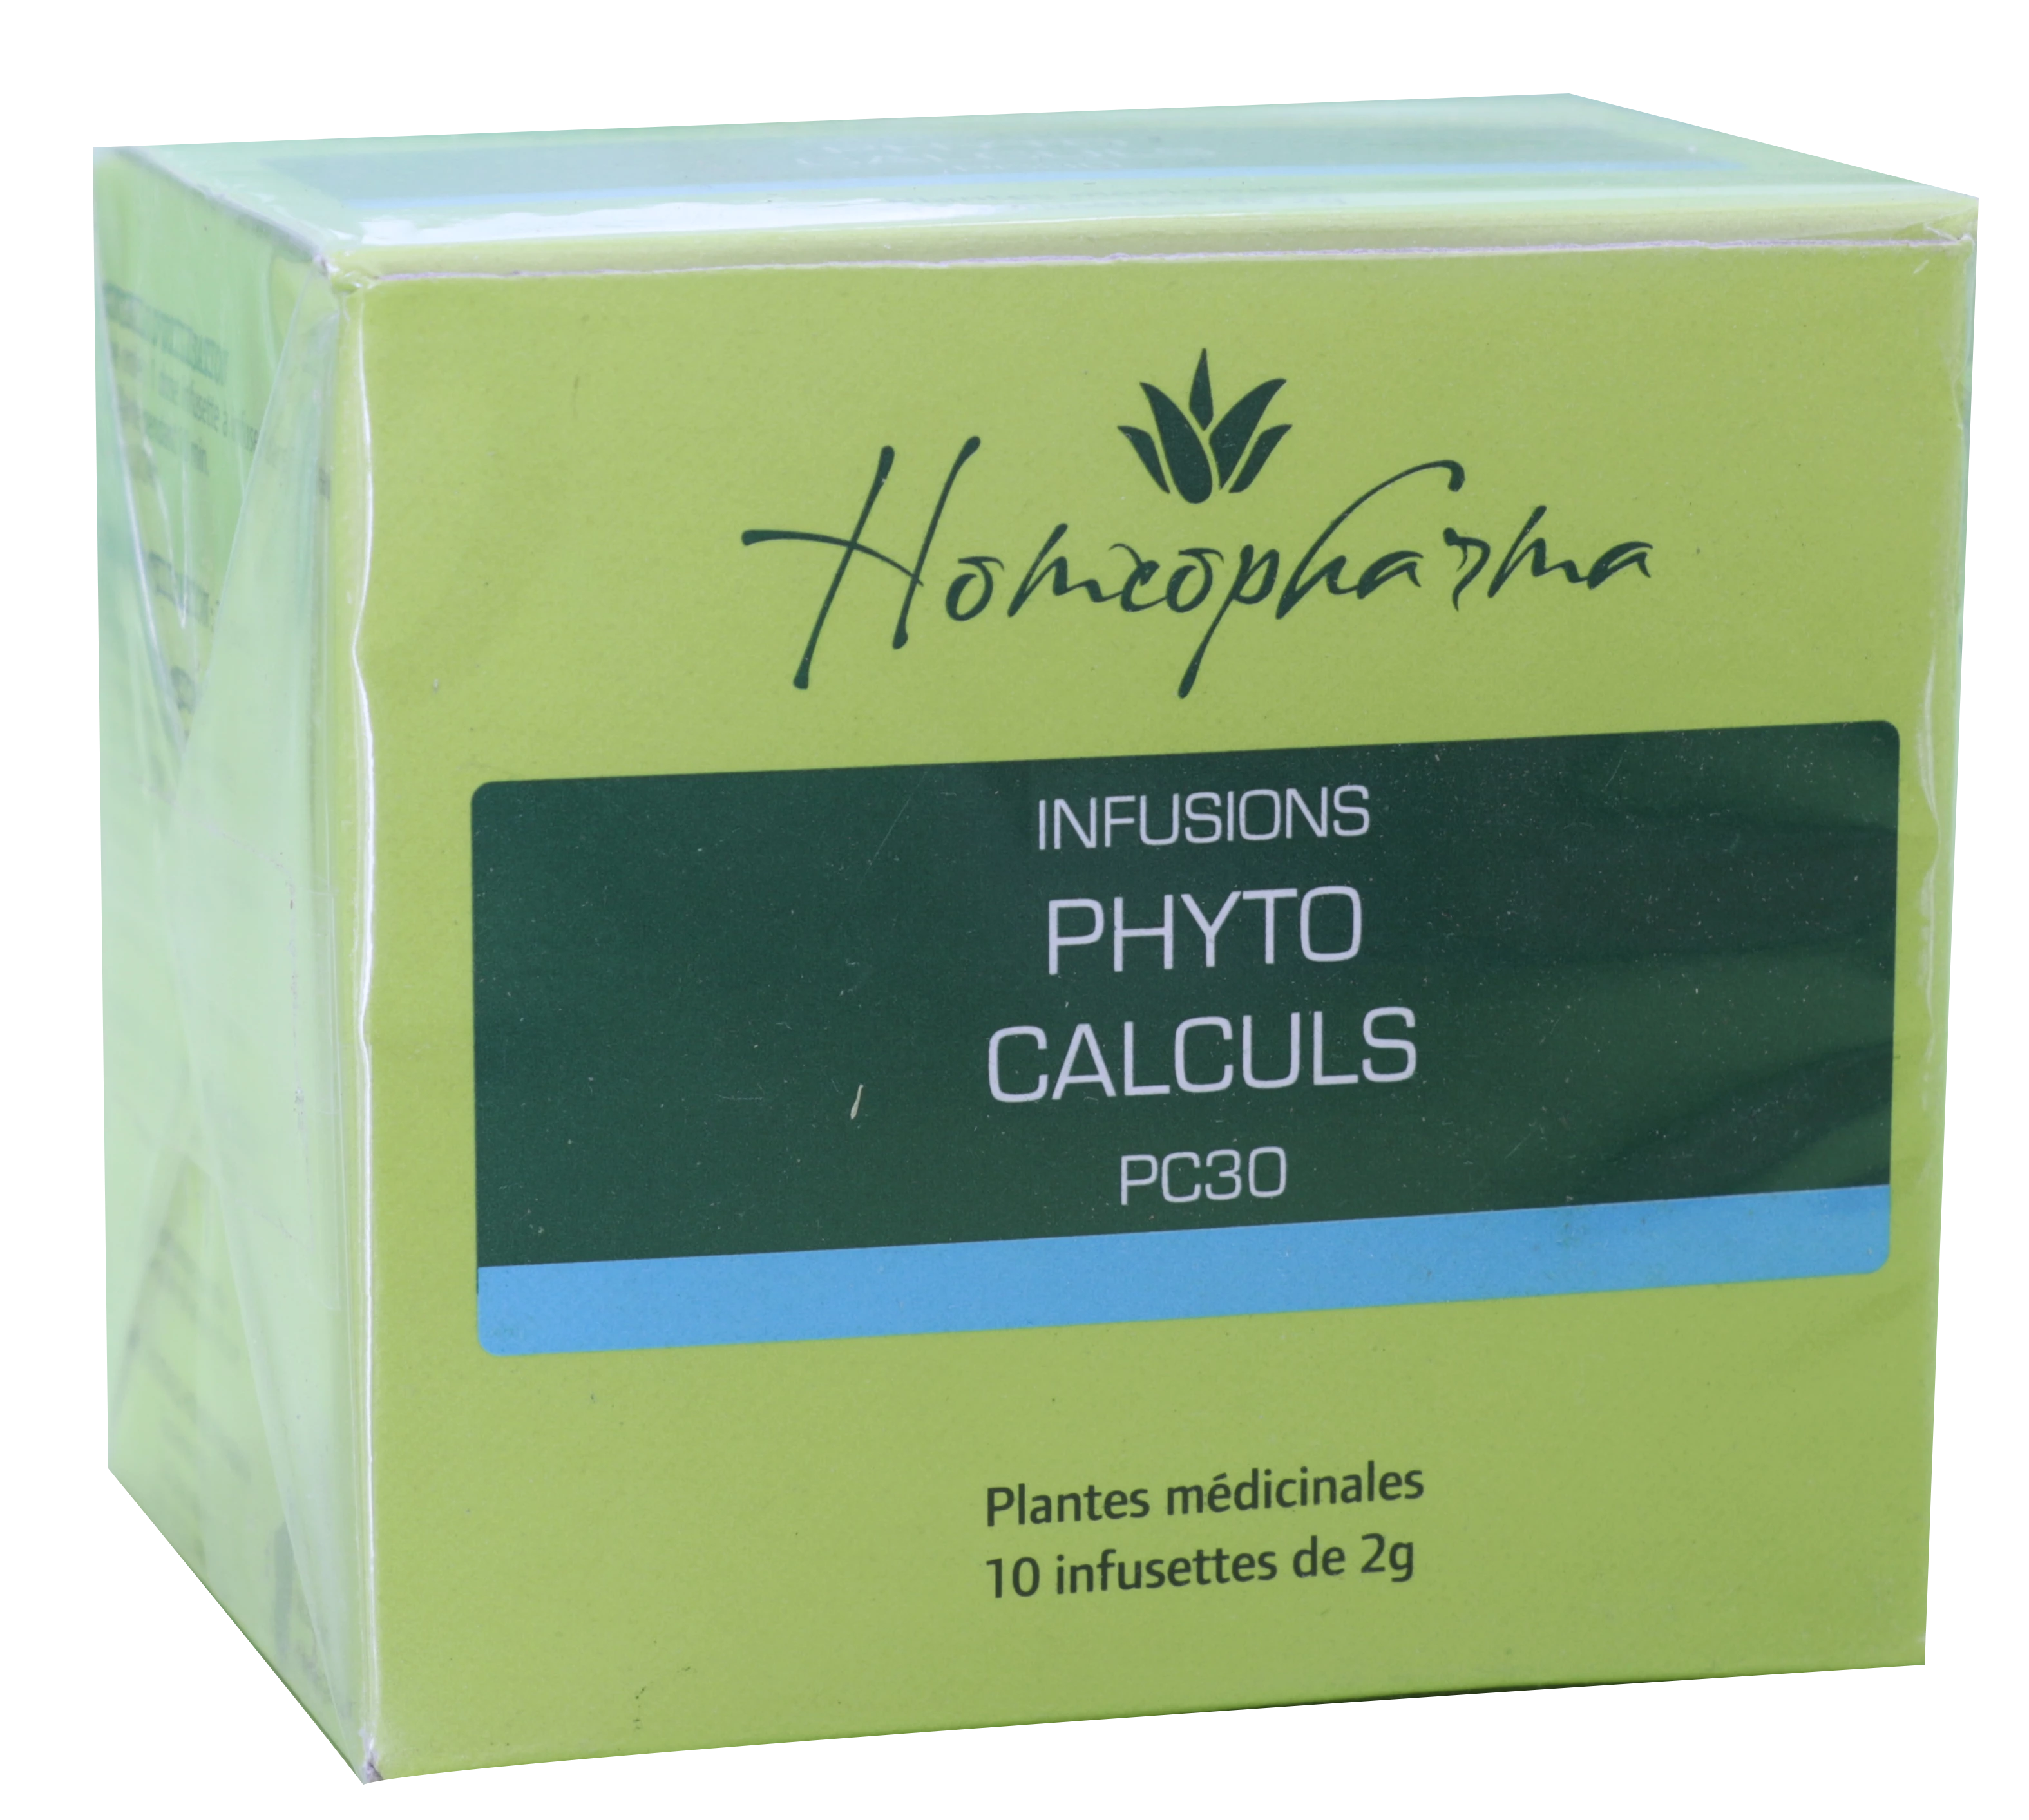 Traditional Phytotherapy Pc30-phyto-calculus Box 20 Infusettes - HOMEOPHARMA